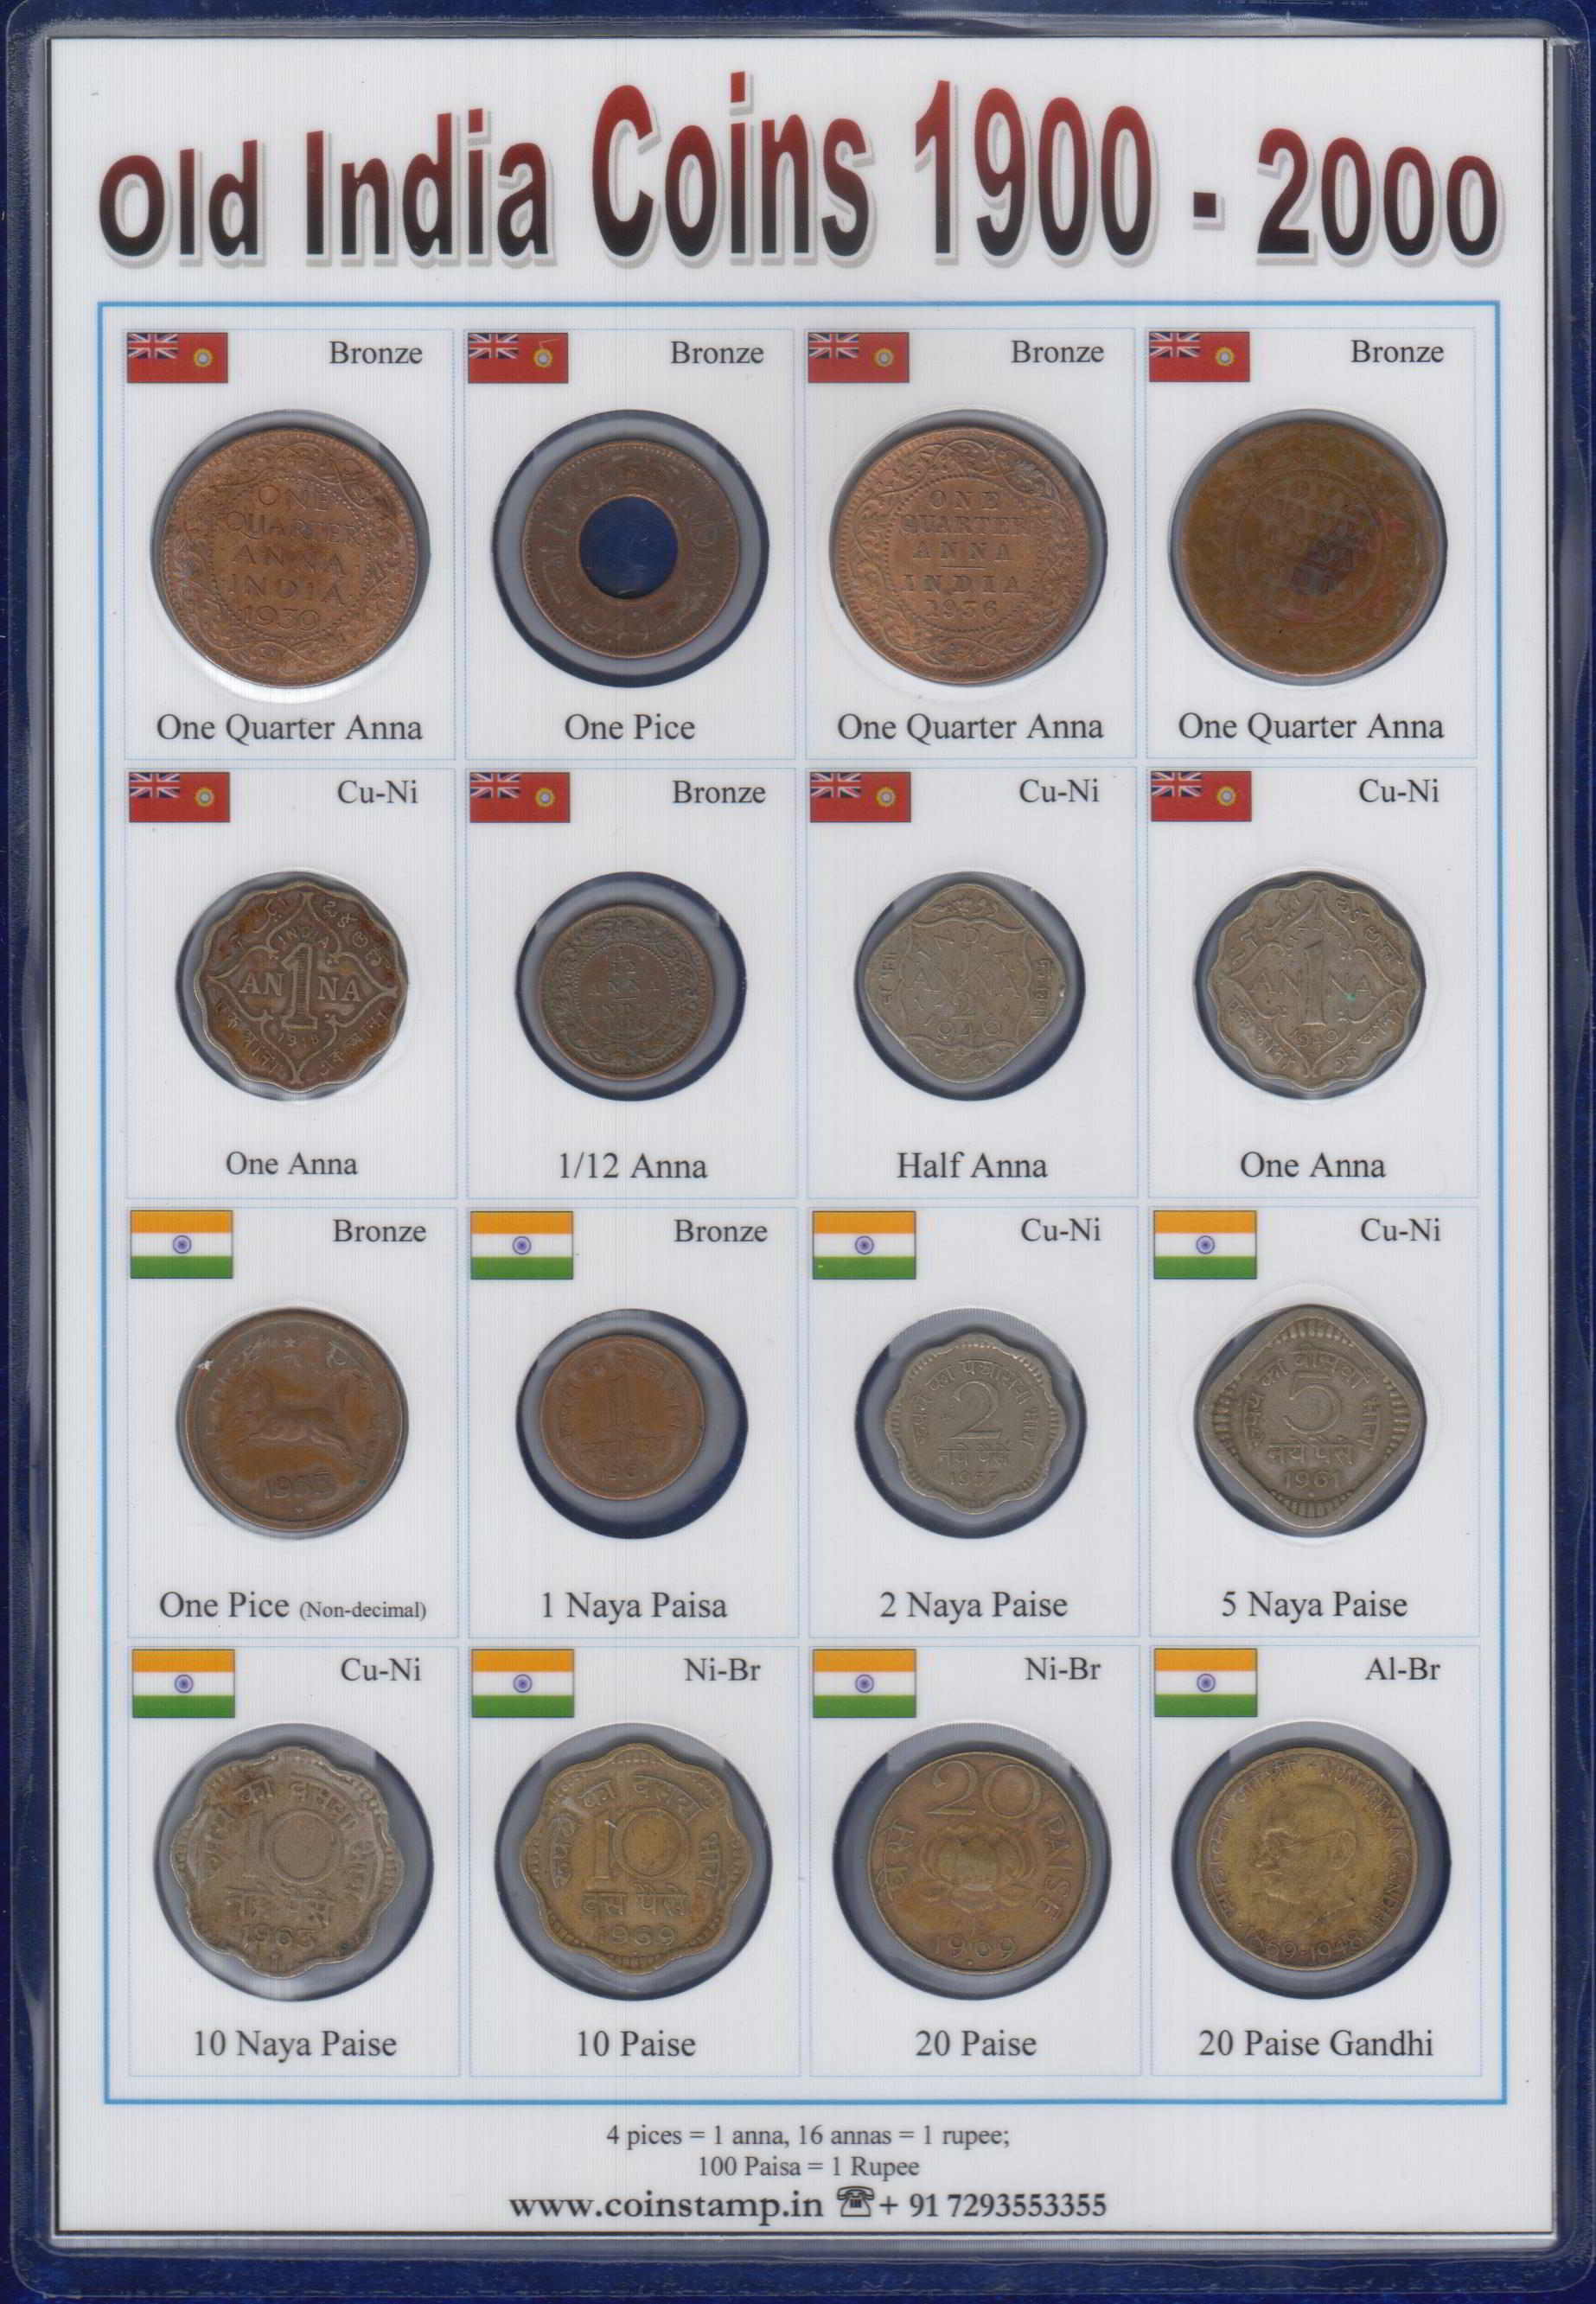 Old India Coins from 1900 - www.coinstamp.in